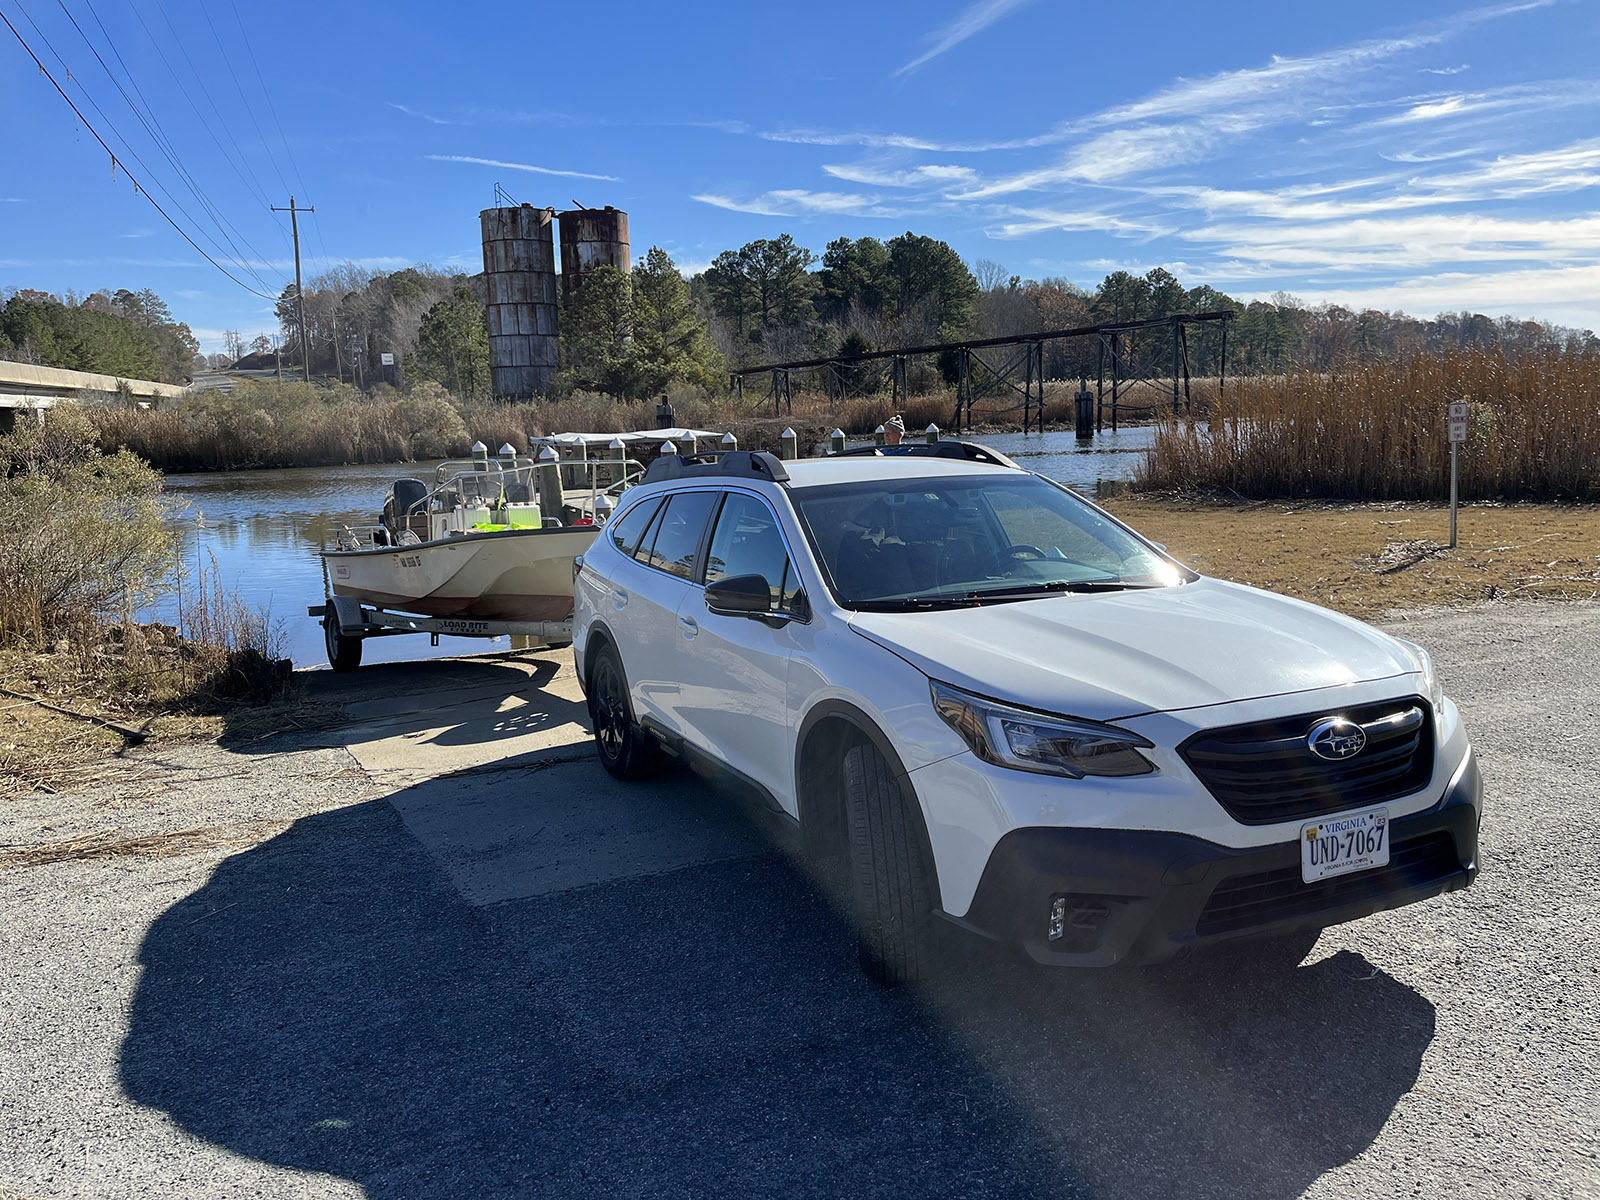 A white car pulling a small boat, backing down a boat ramp into a river.